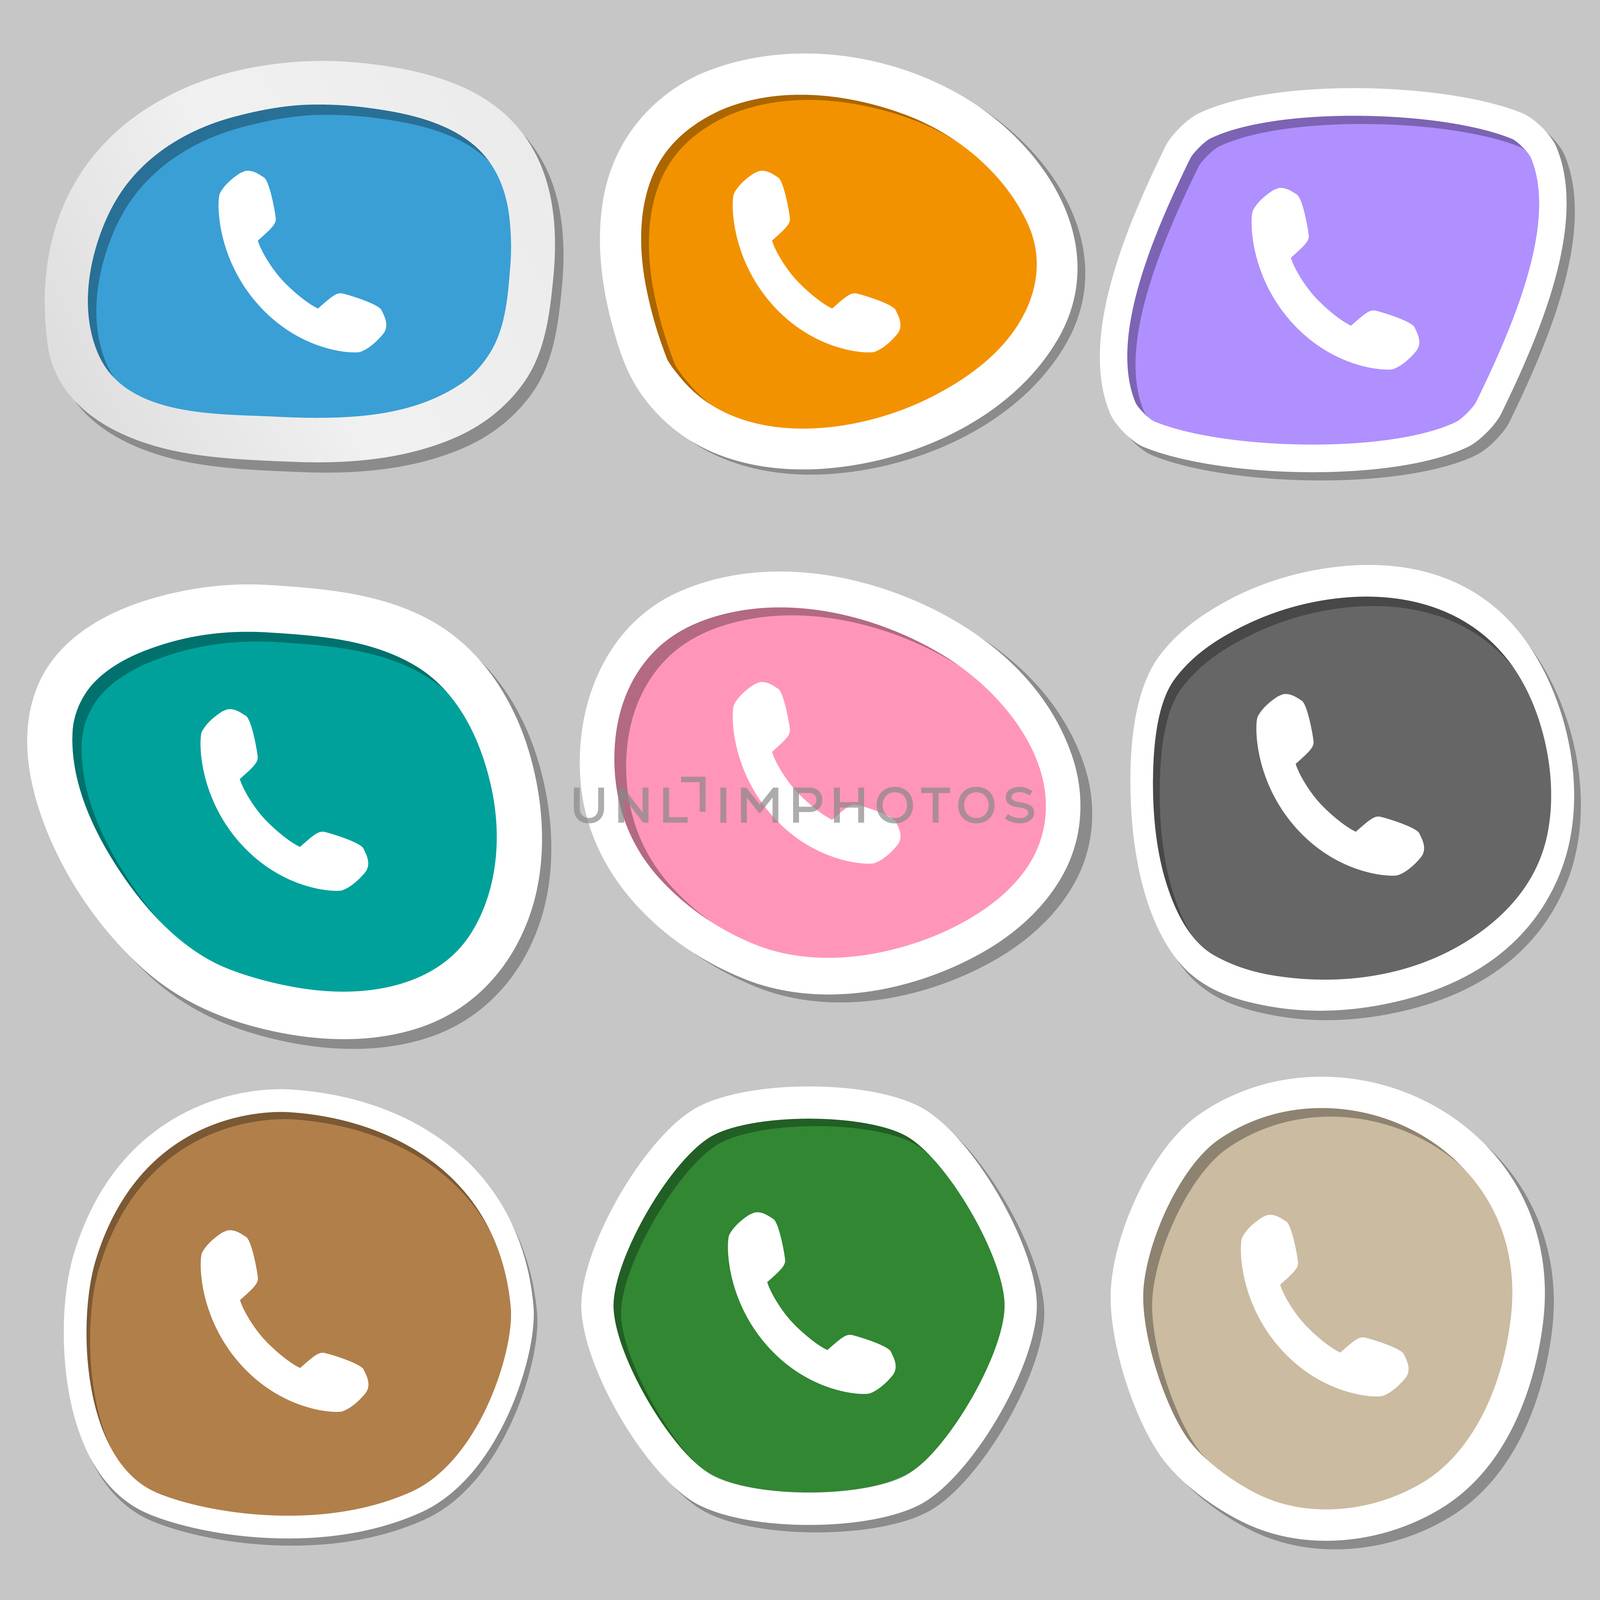 Phone, Support, Call center icon symbols. Multicolored paper stickers.  by serhii_lohvyniuk